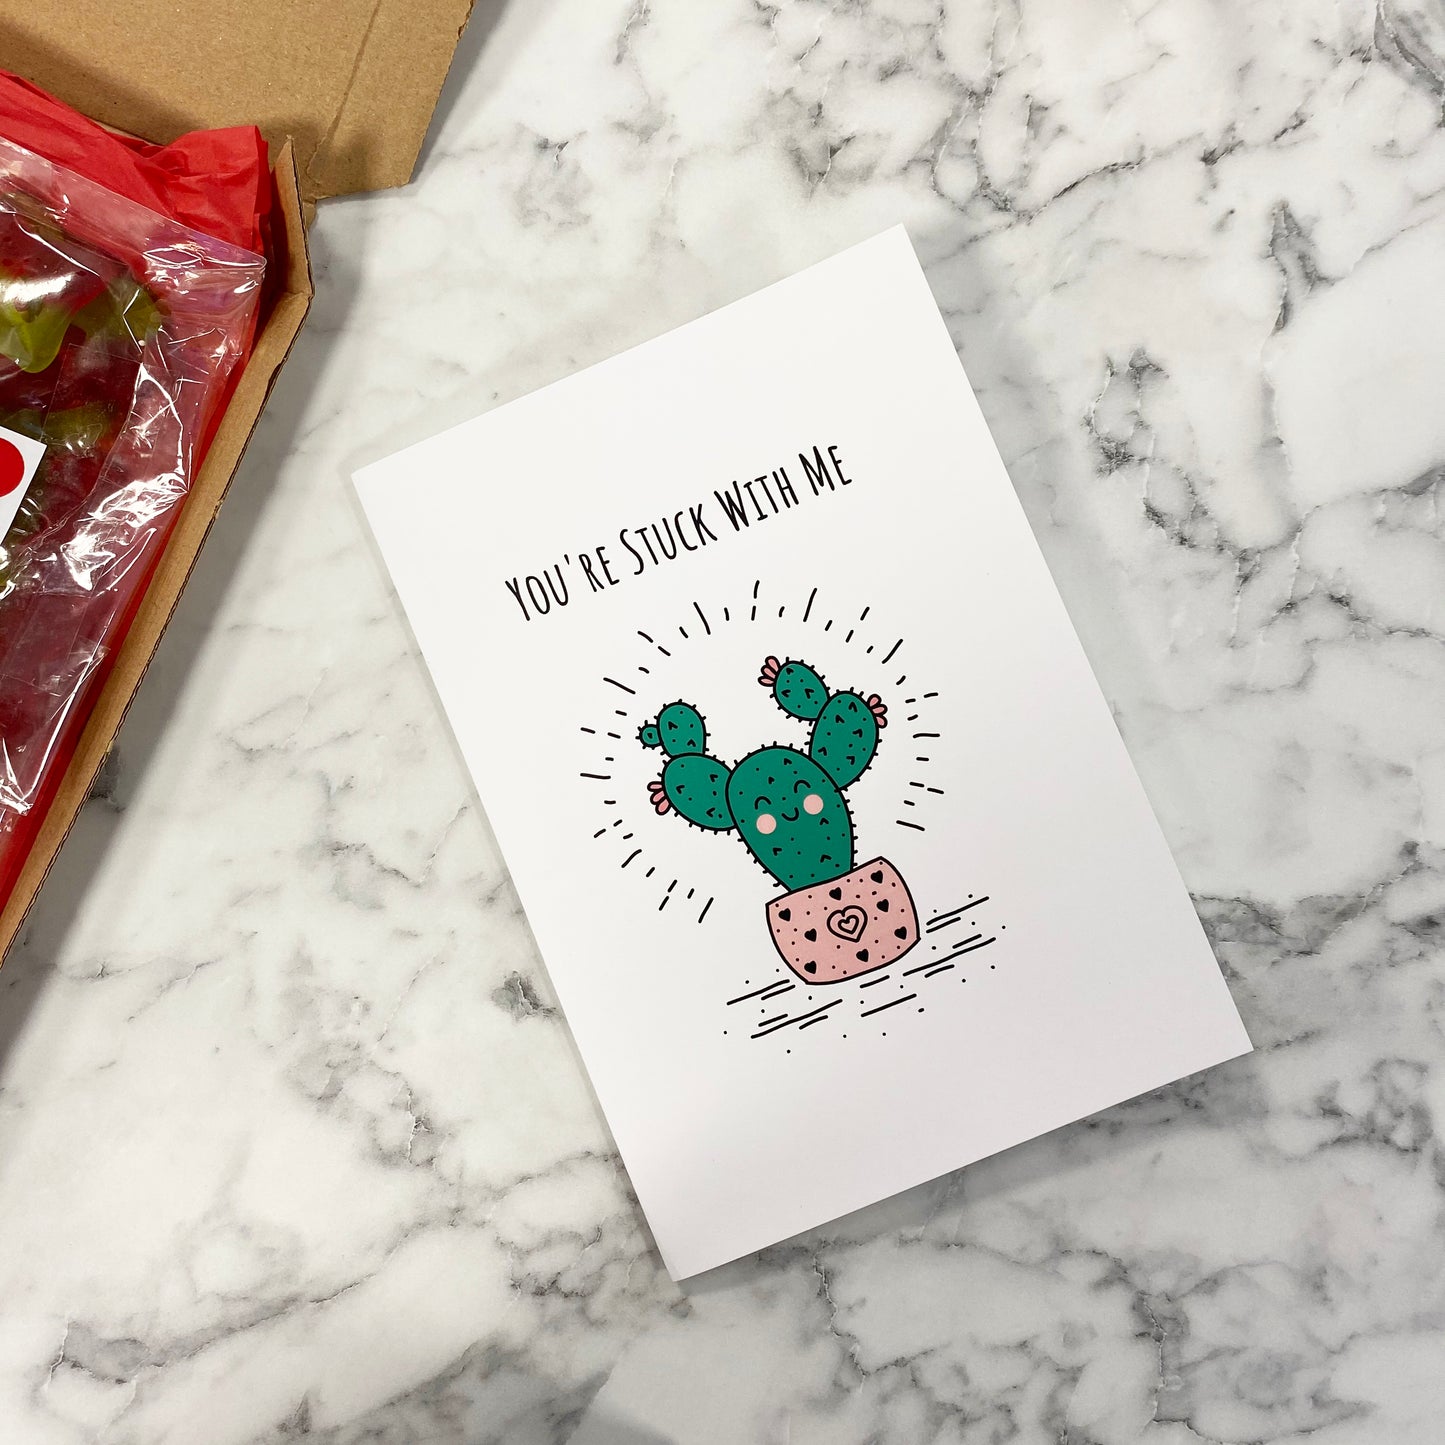 Humorous ' You Are Stuck With Me' Valentine's Card